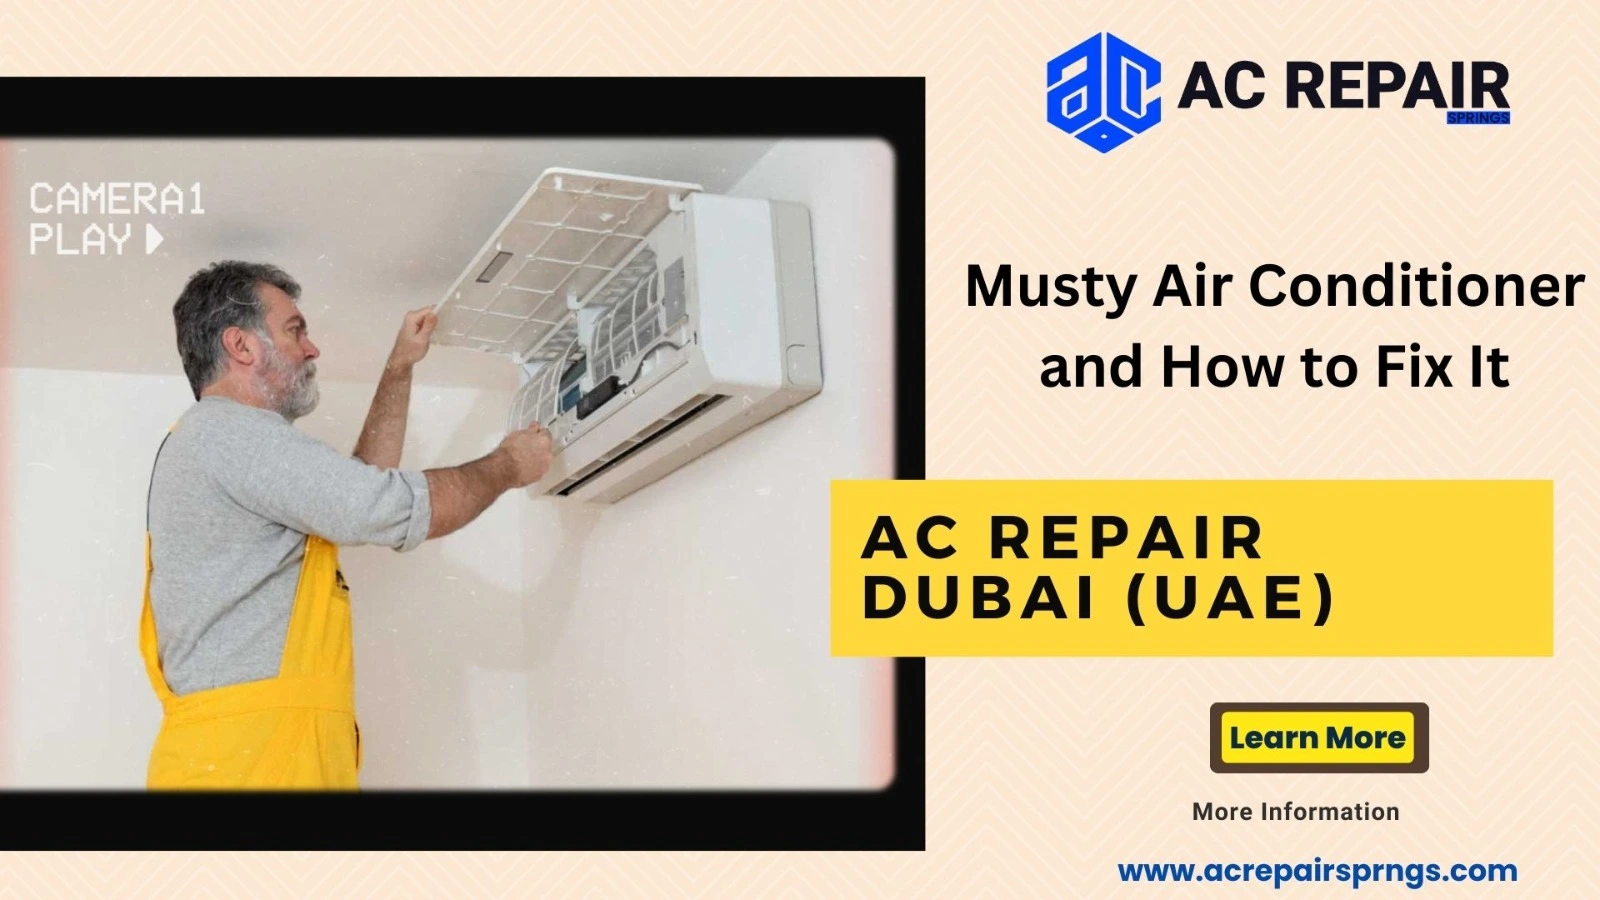 Musty Air Conditioner and How to Fix It